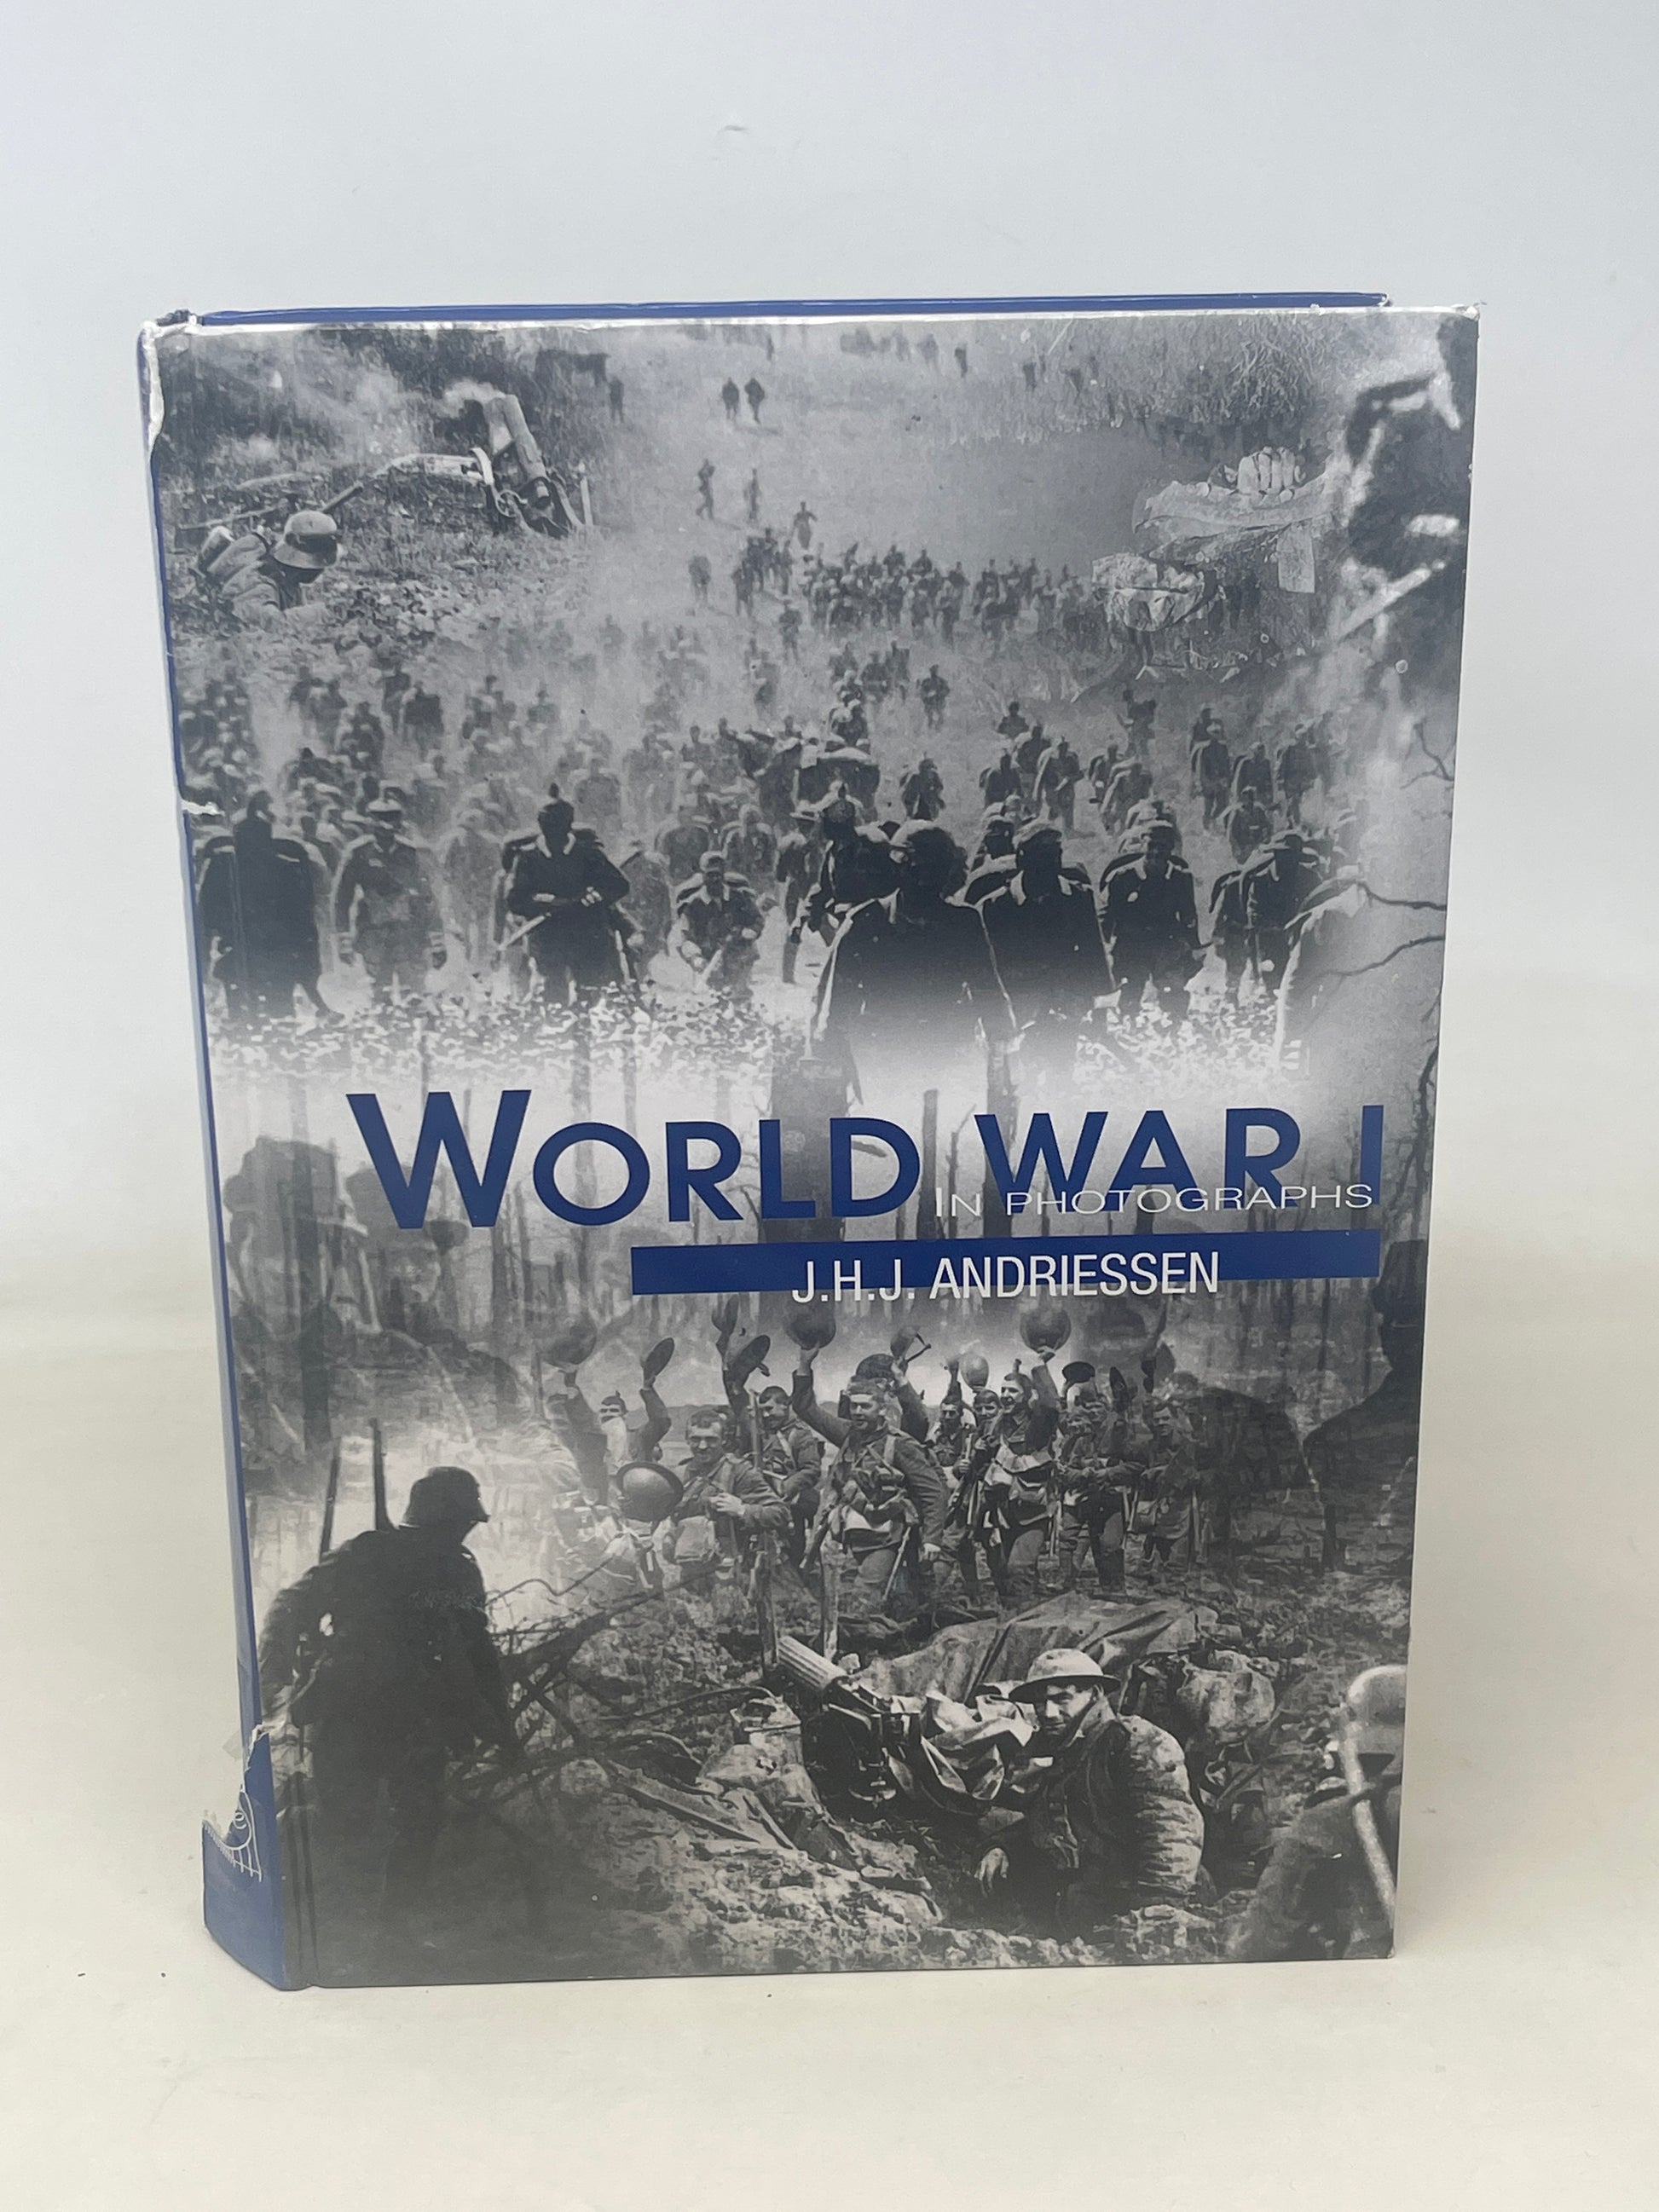 World War I in Photographs by J.H.J Andriessen